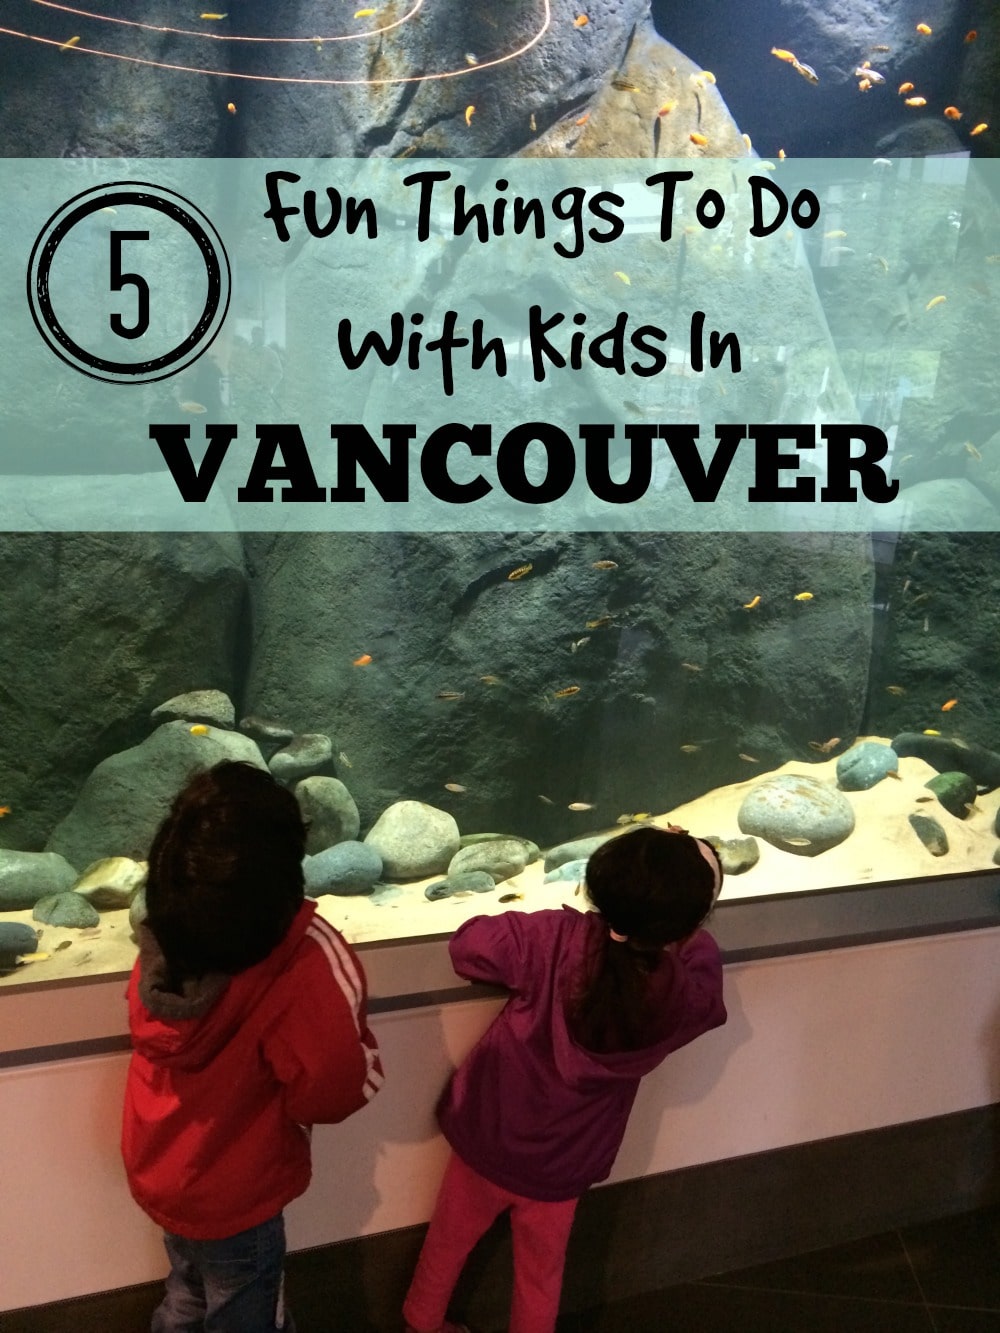 5 Fun Things To Do With Kids in Vancouver